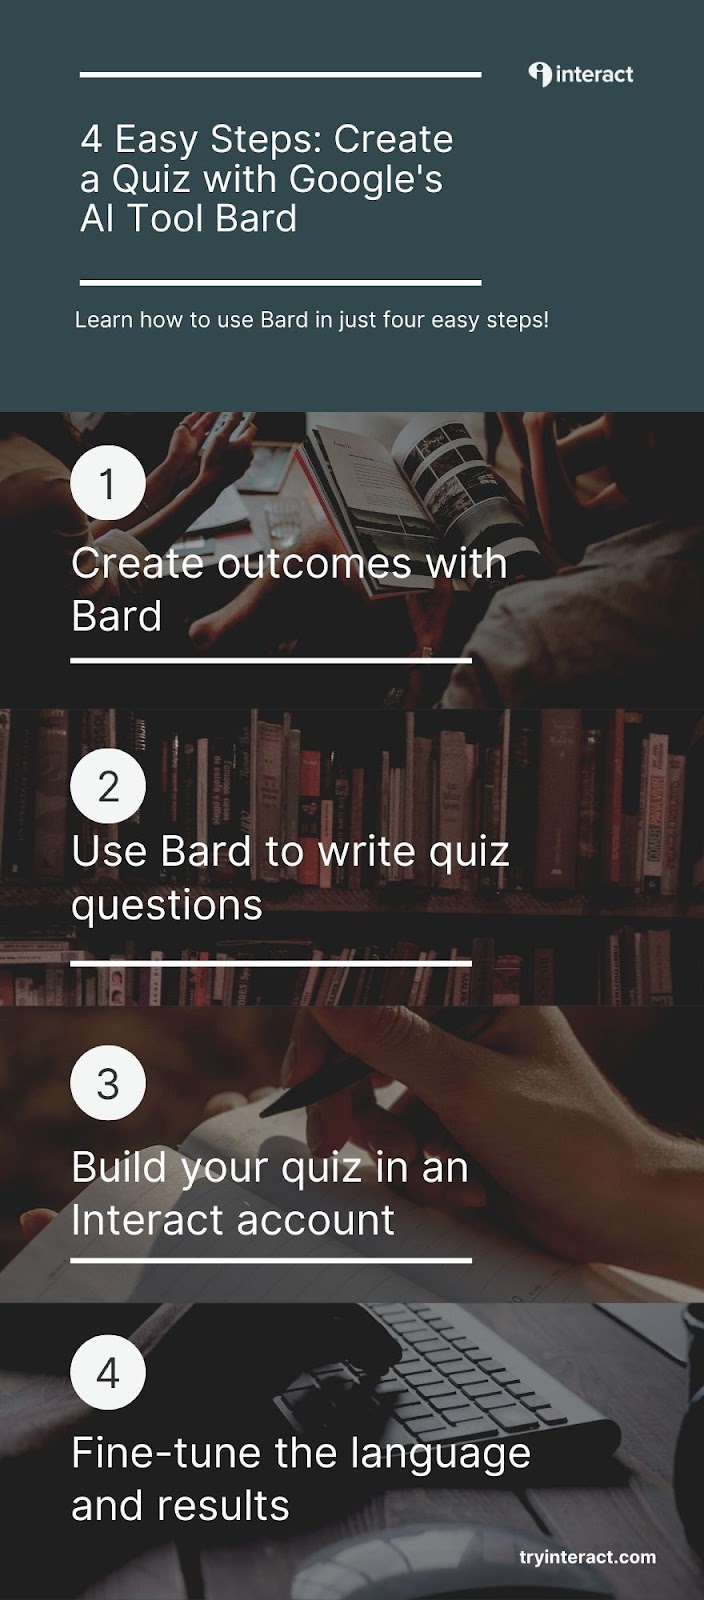 4 easy steps to create a quiz with Google's AI tool, Bard:
1. Create outcomes with Bard
2. Use bard to write quiz questions
3. Build your quiz in an Interact account
4. Fine tune the language and results